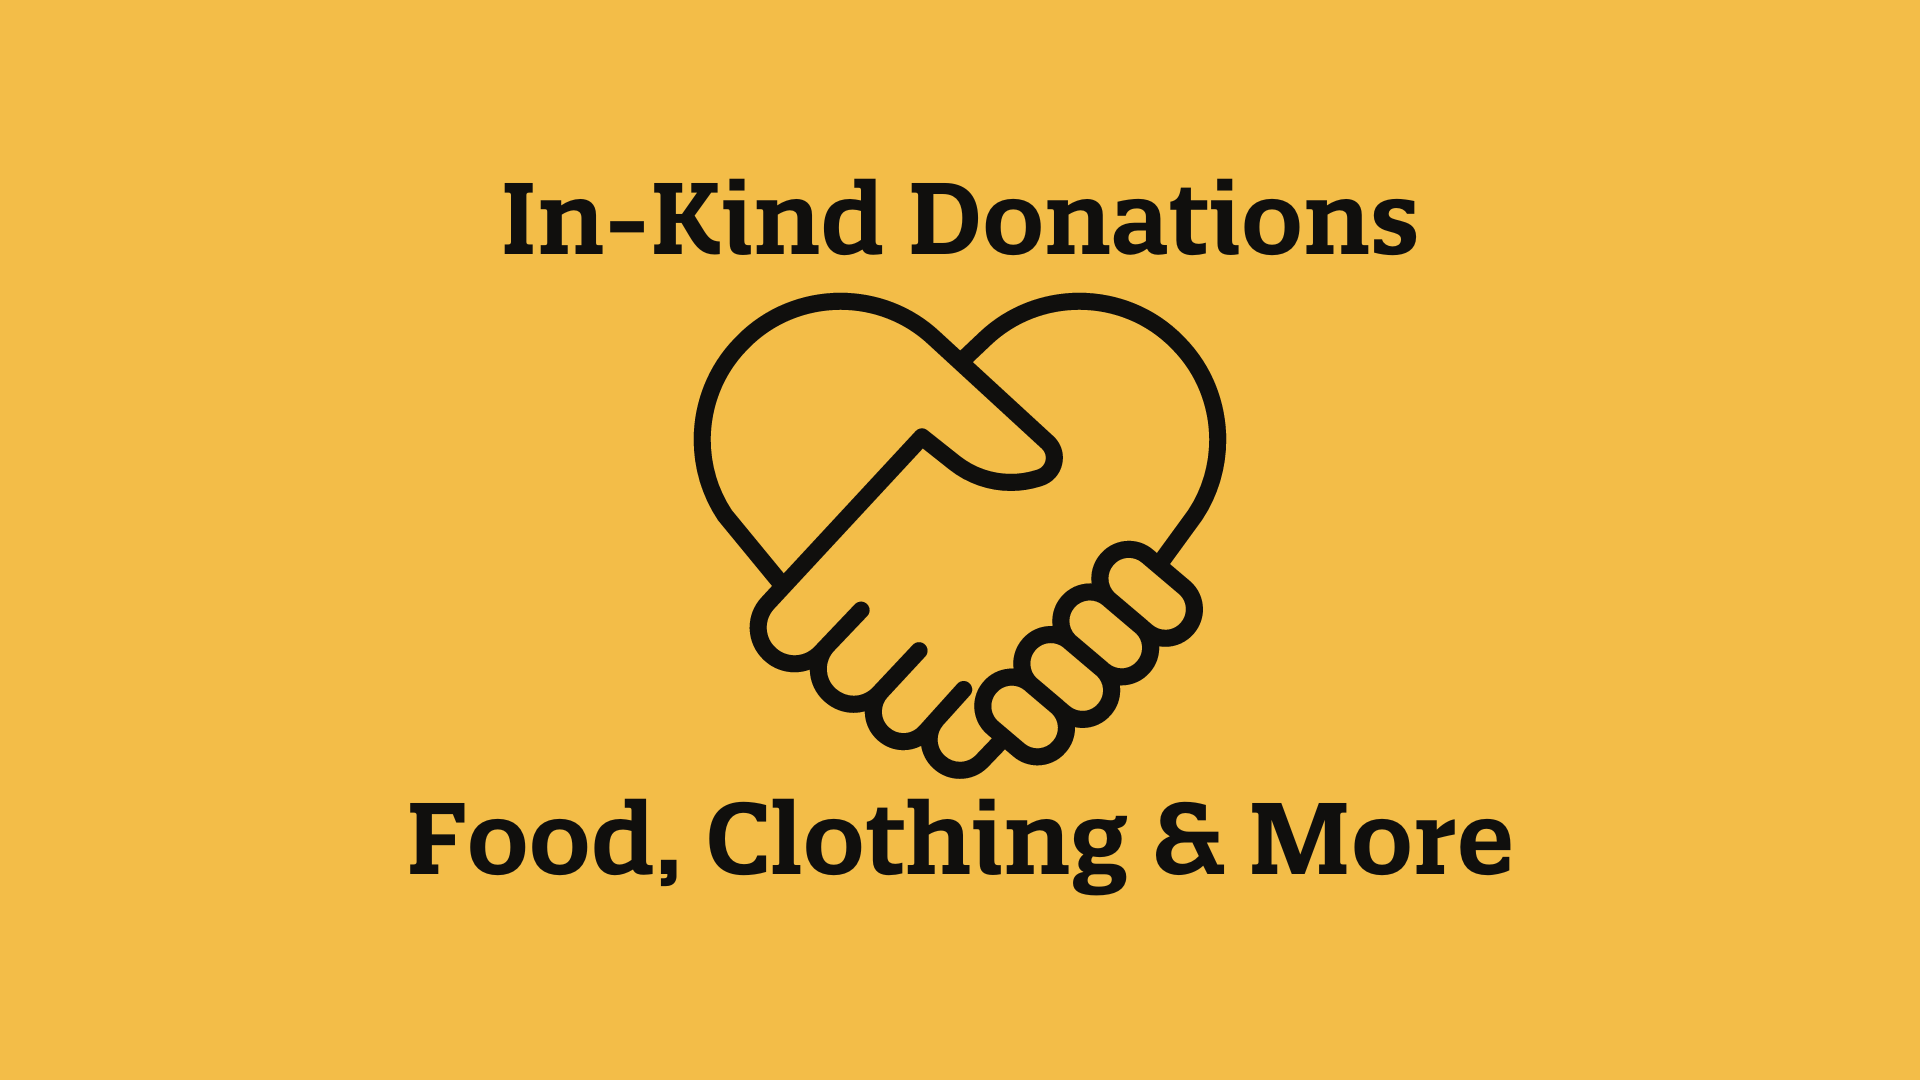 In-Kind Donations